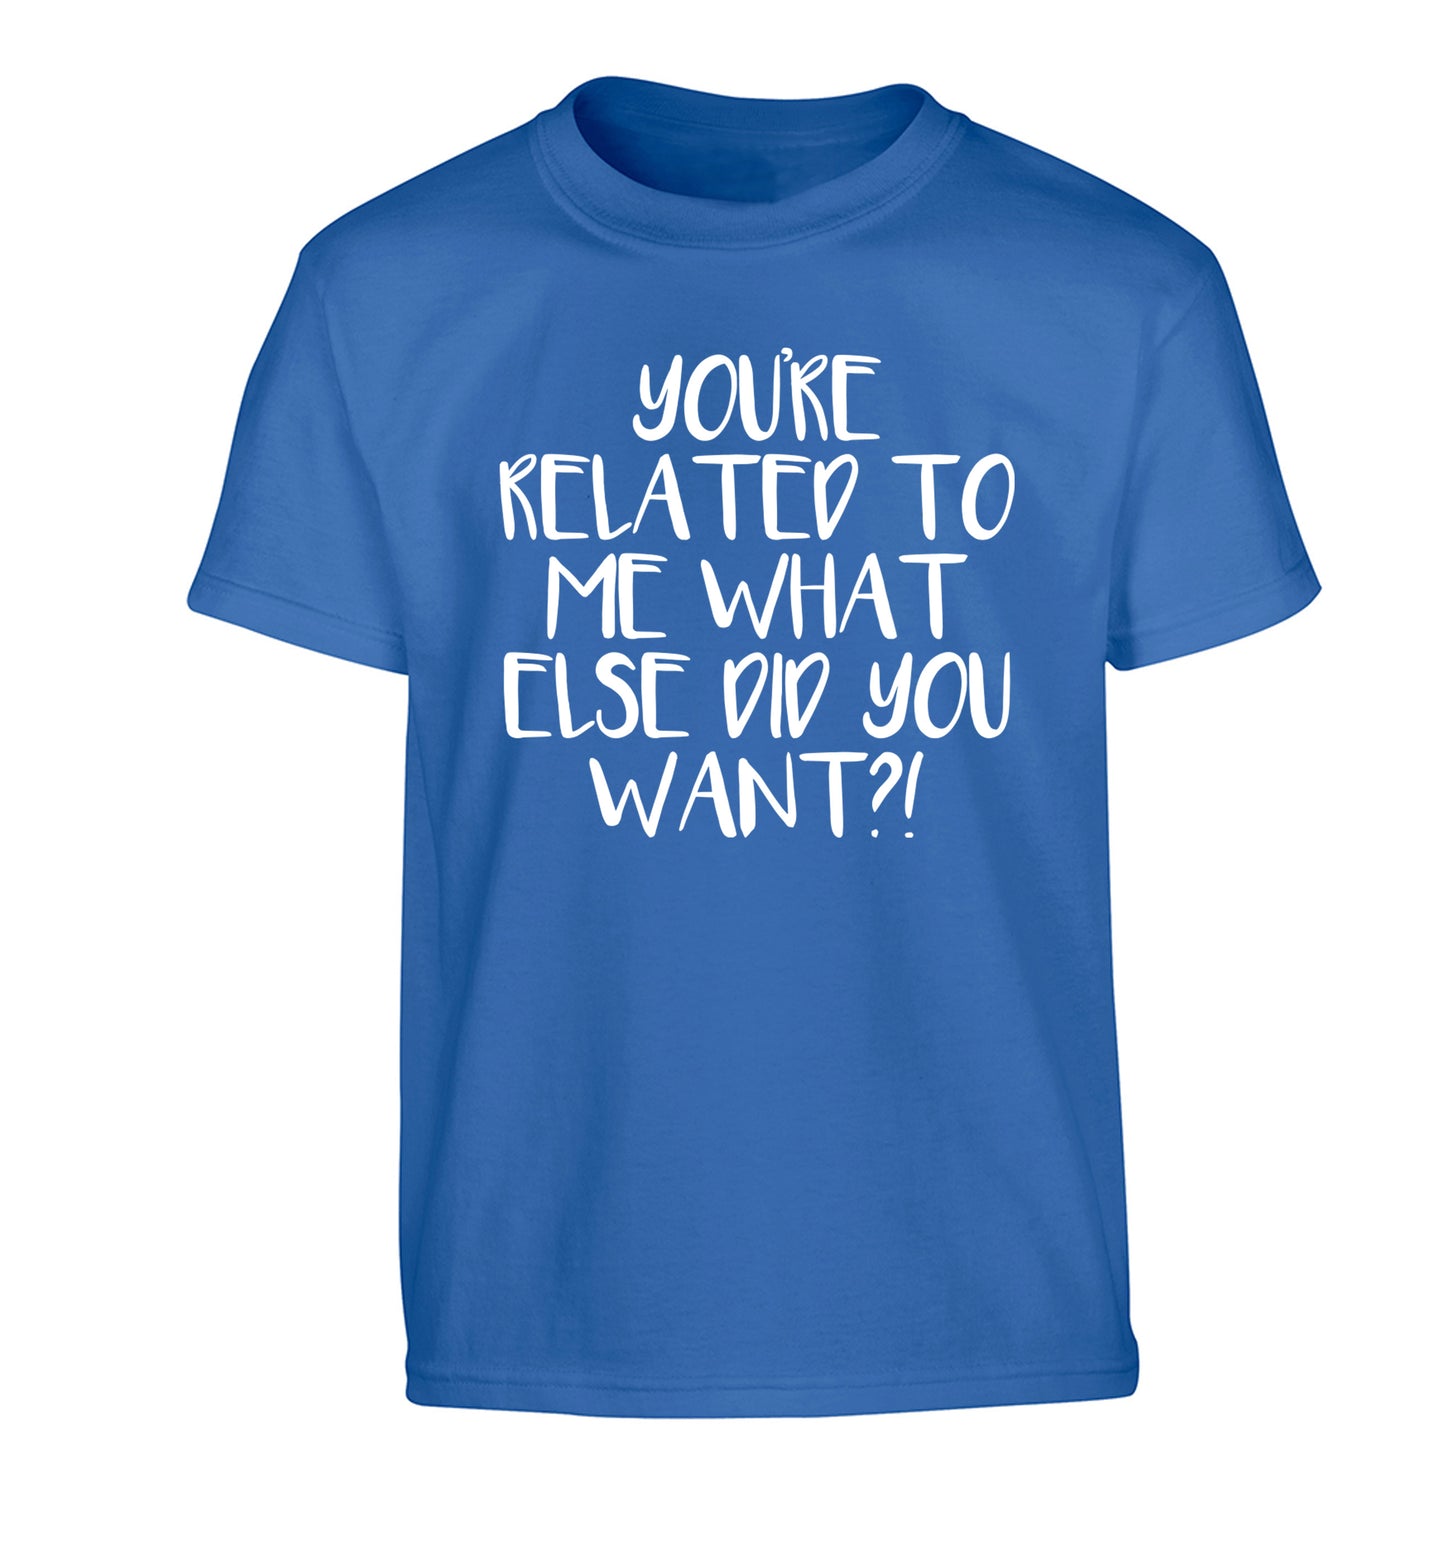 You're related to me what more do you want? Children's blue Tshirt 12-13 Years